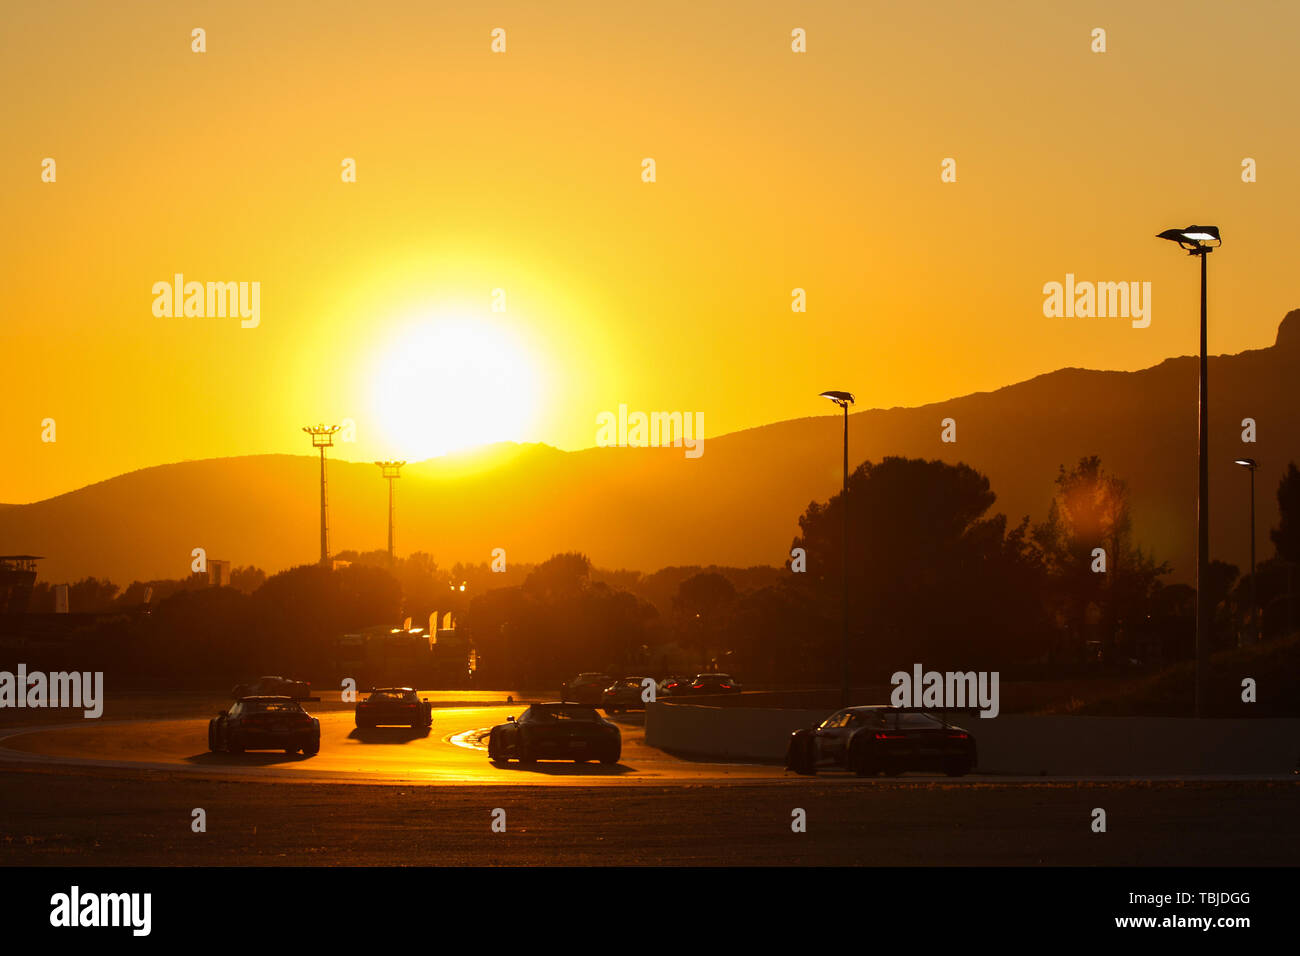 Le Castellet, France. 01st June, 2019. The sunsets over the Circuit Paul Ricard during the Blancpain GT Series Endurance Cup at Circuit Paul Ricard, Le Castellet, France on 1 June 2019. Photo by Jurek Biegus. Credit: UK Sports Pics Ltd/Alamy Live News Stock Photo